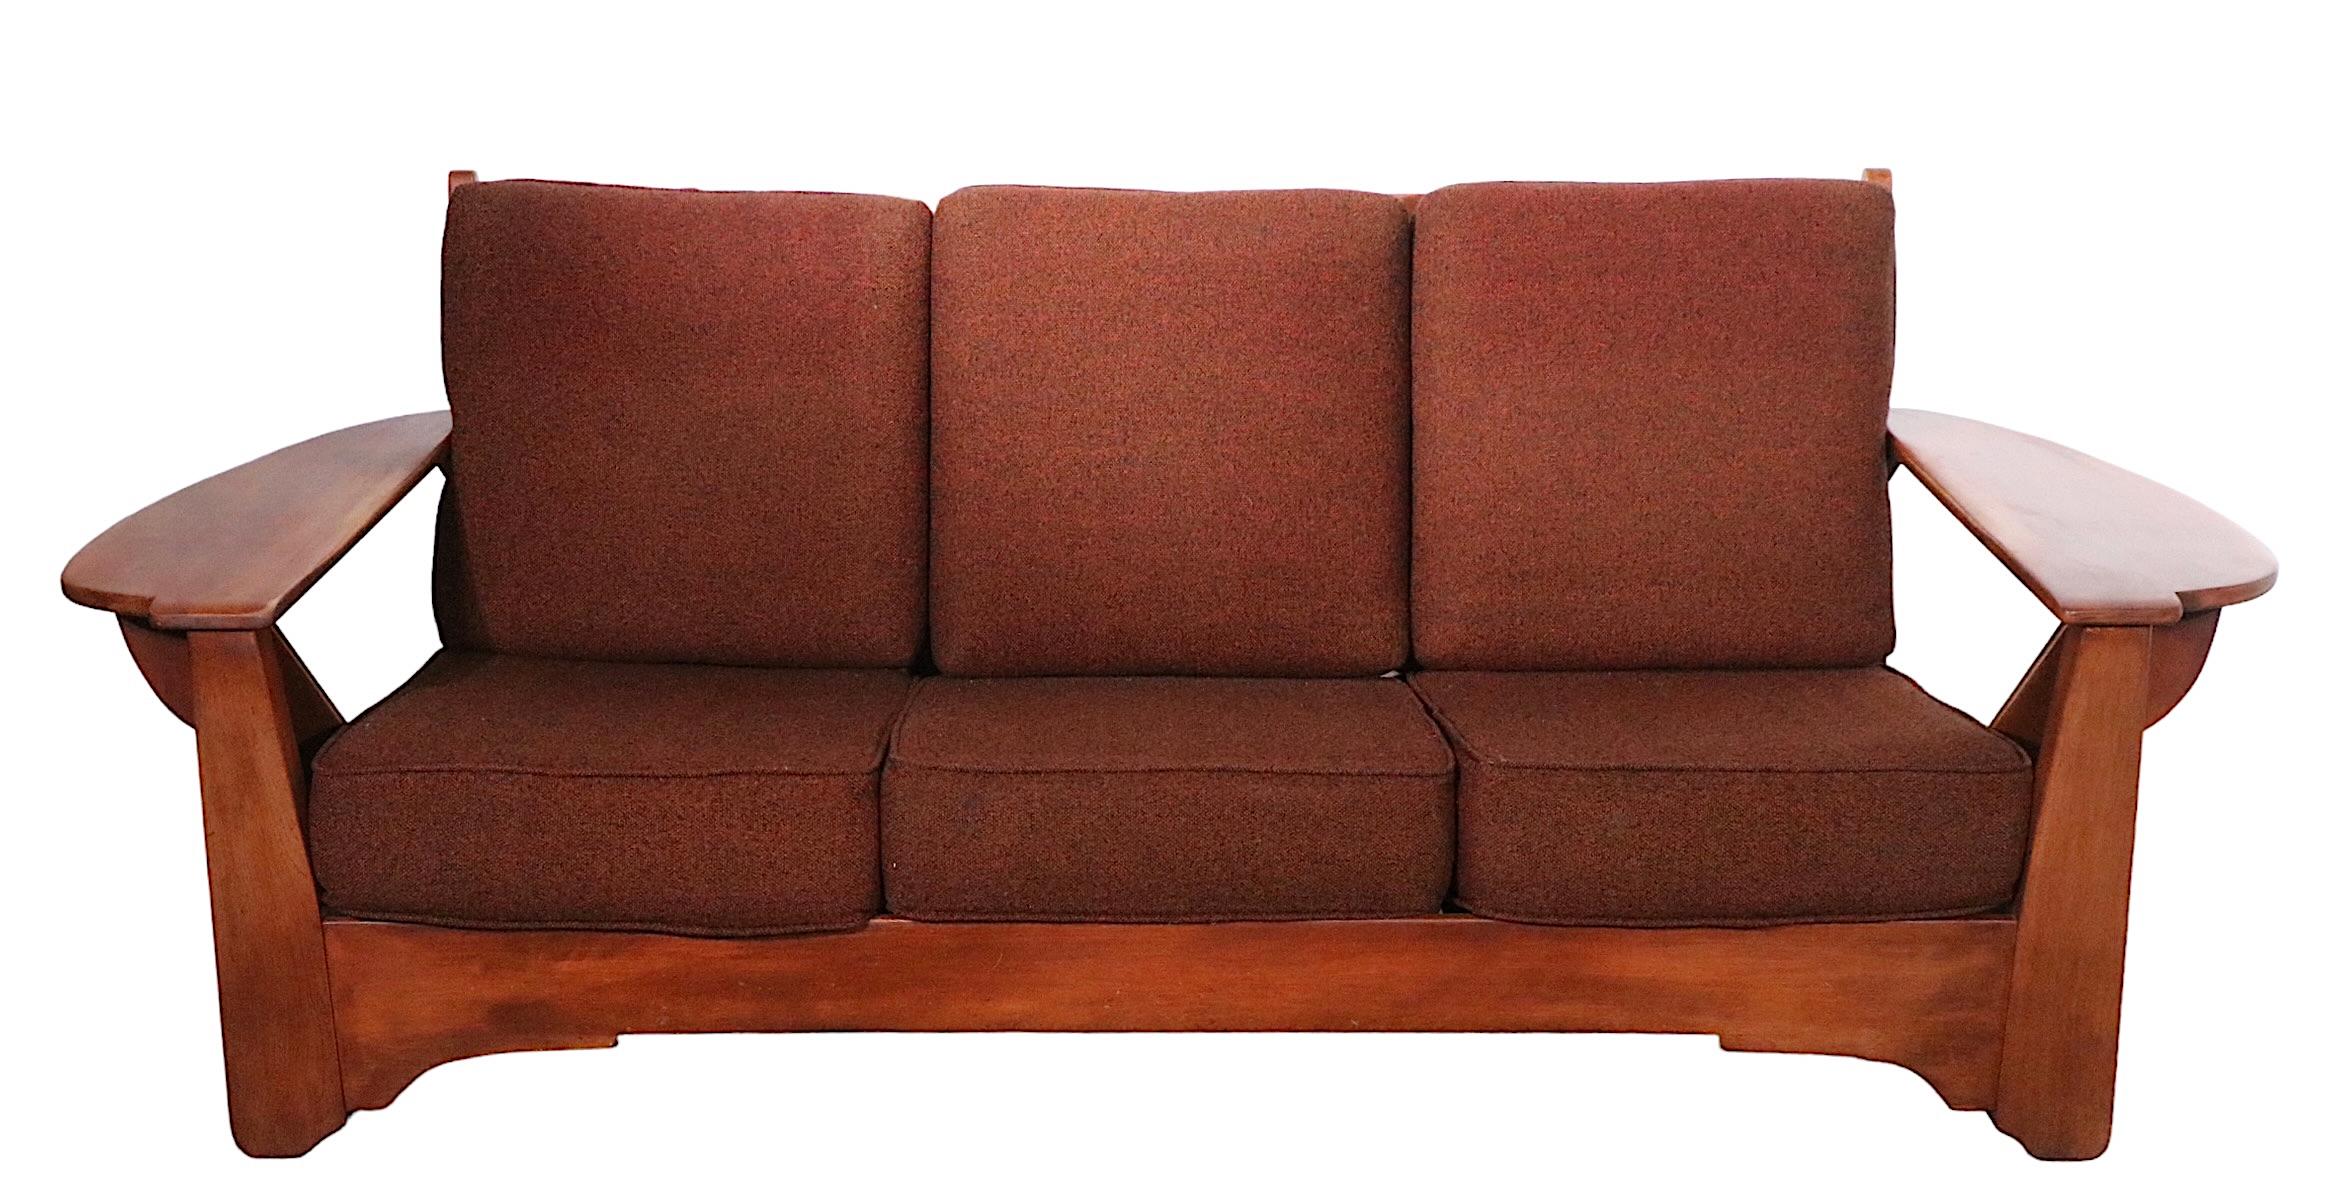 Exceptional full size Cushman Colonial Creations sofa, designed by Herman de Vries, circa 1940 -1950's. The sofa features an exaggerated wide paddle form arm, with a chic and sophisticated low slung profile. The solid maple frame supports the brown